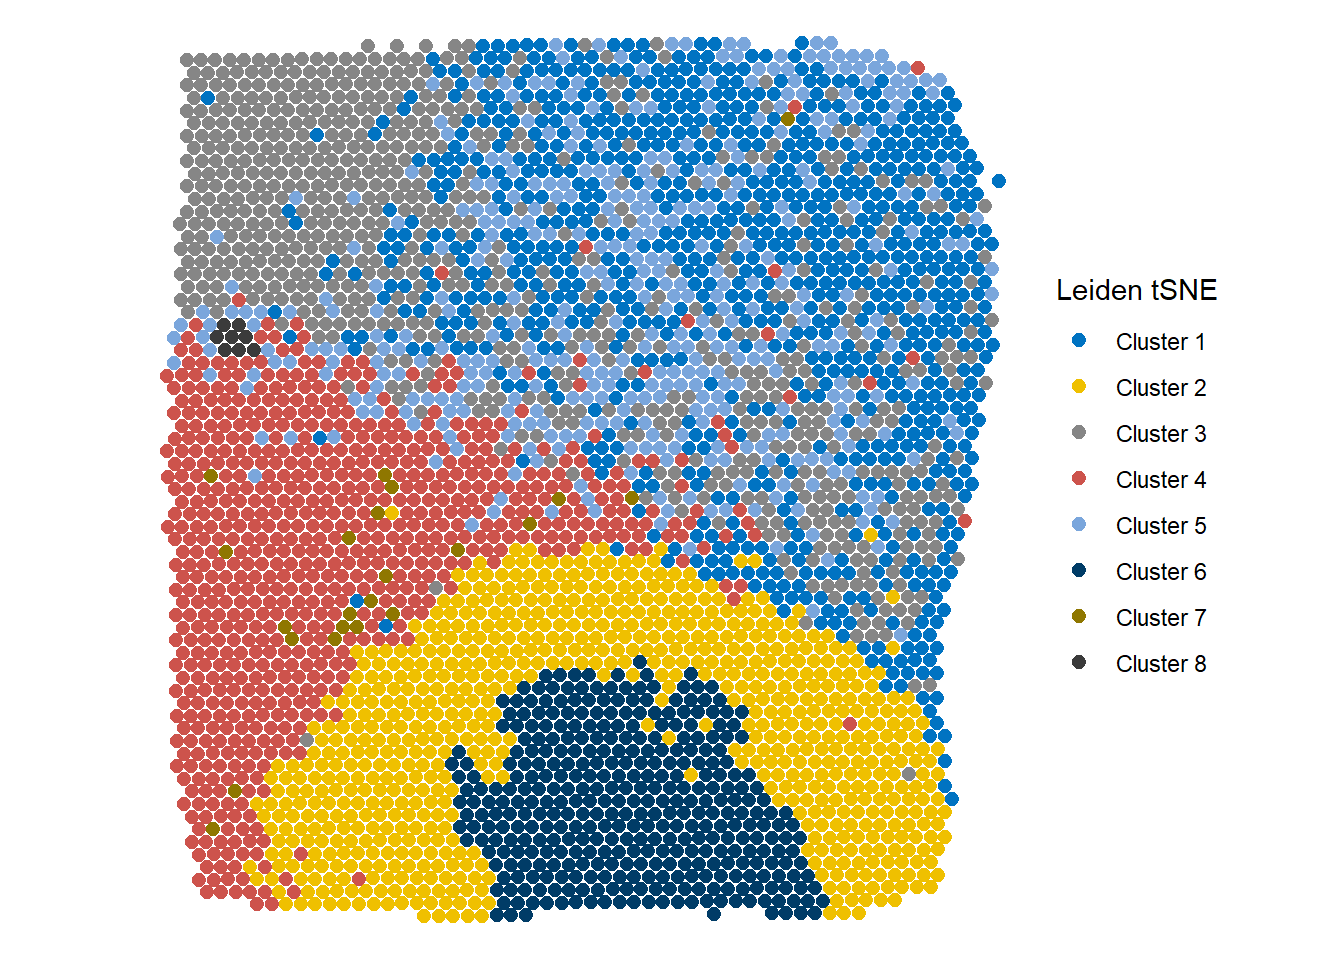 Figure 2.2 Easy visualization of different clustering results - Leiden tSNE